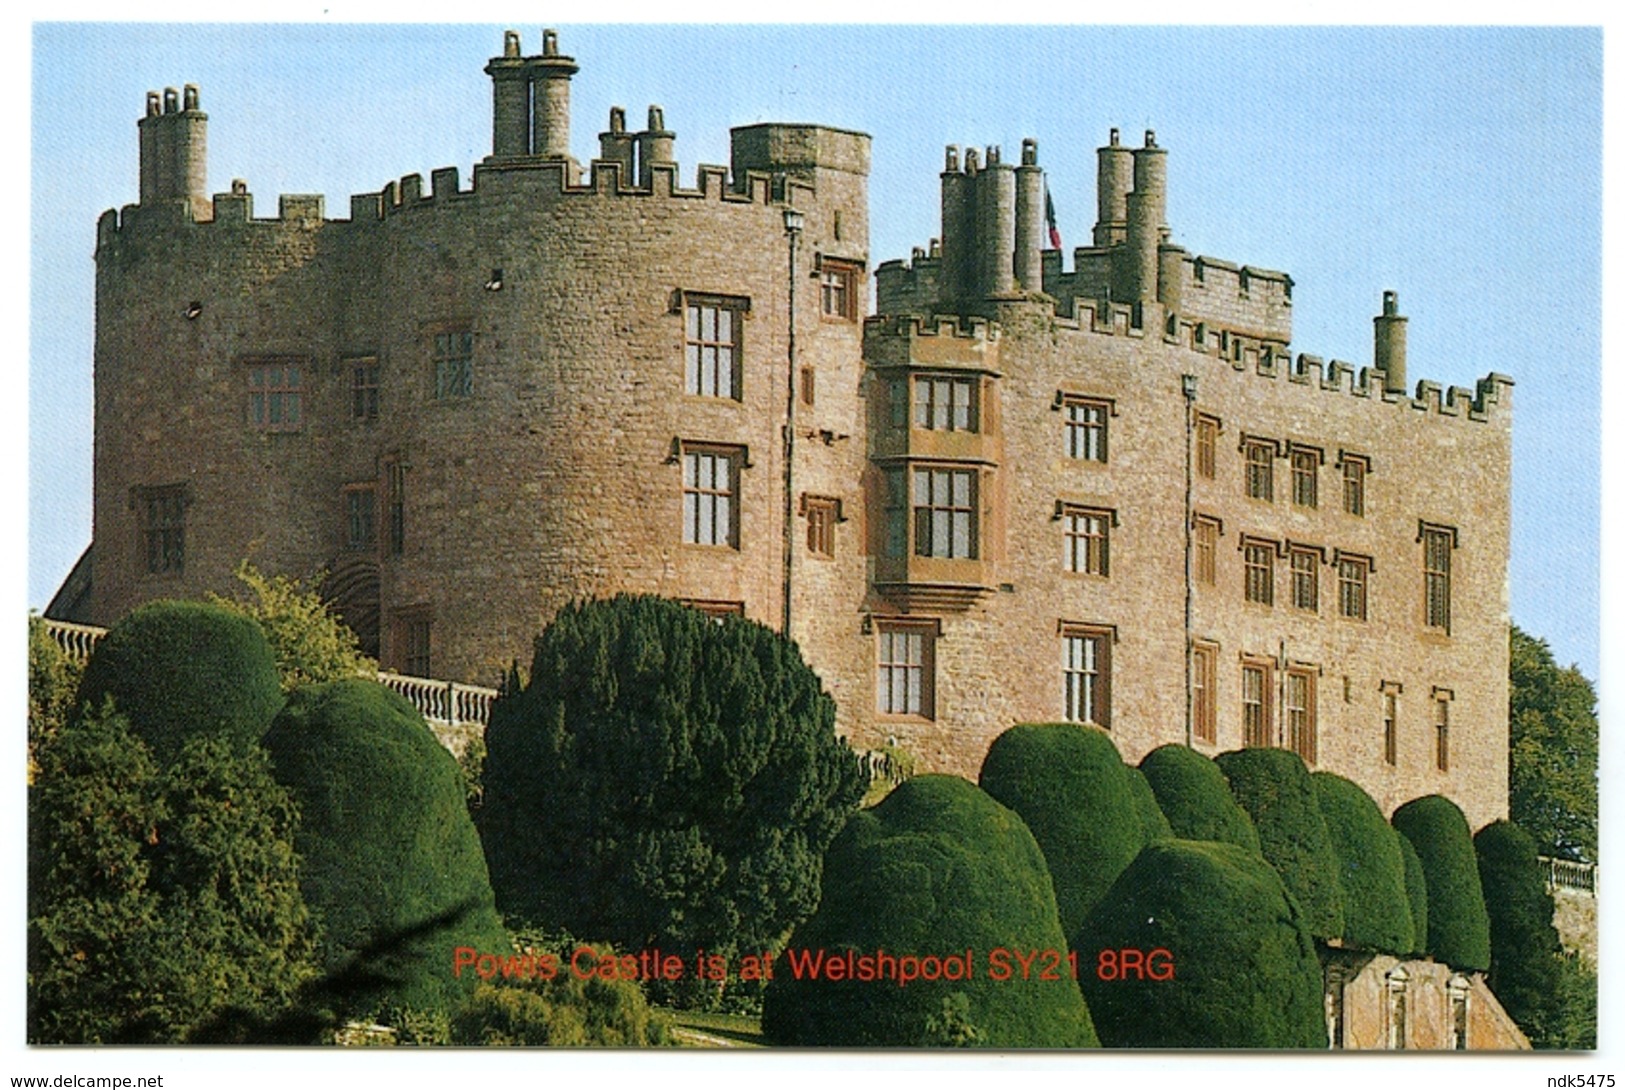 POST OFFICE PICTURE CARD : POWIS CASTLE IS AT WELSHPOOL SY21 8RG (POSTCODE) - Montgomeryshire